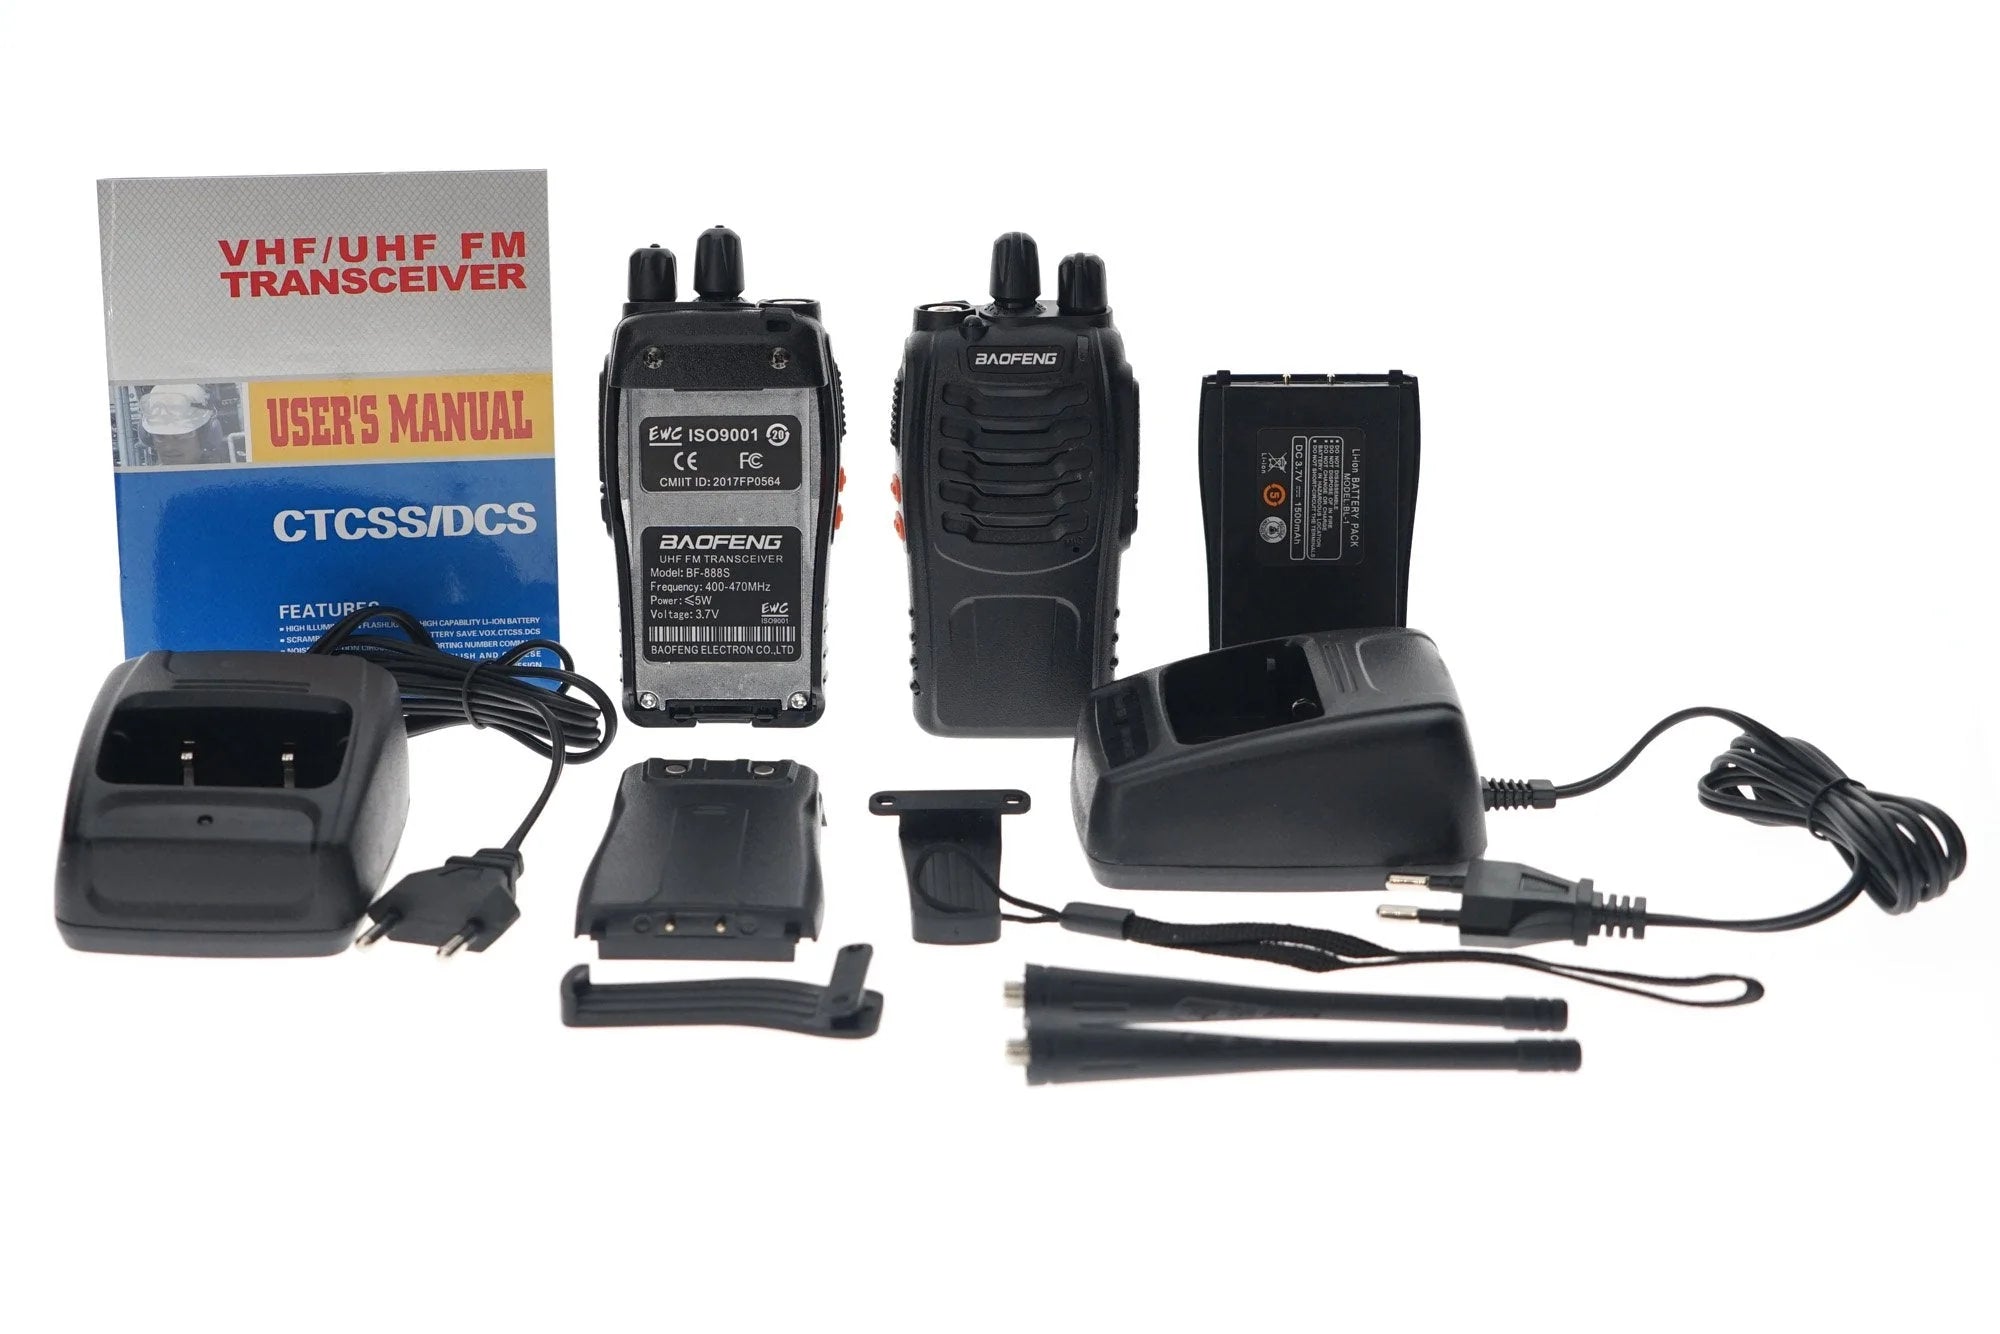 Walkie Talkie Handheld Two Way Radios Battery with Charger Channel Capacity 16 Long Range - Al Ghani Stores